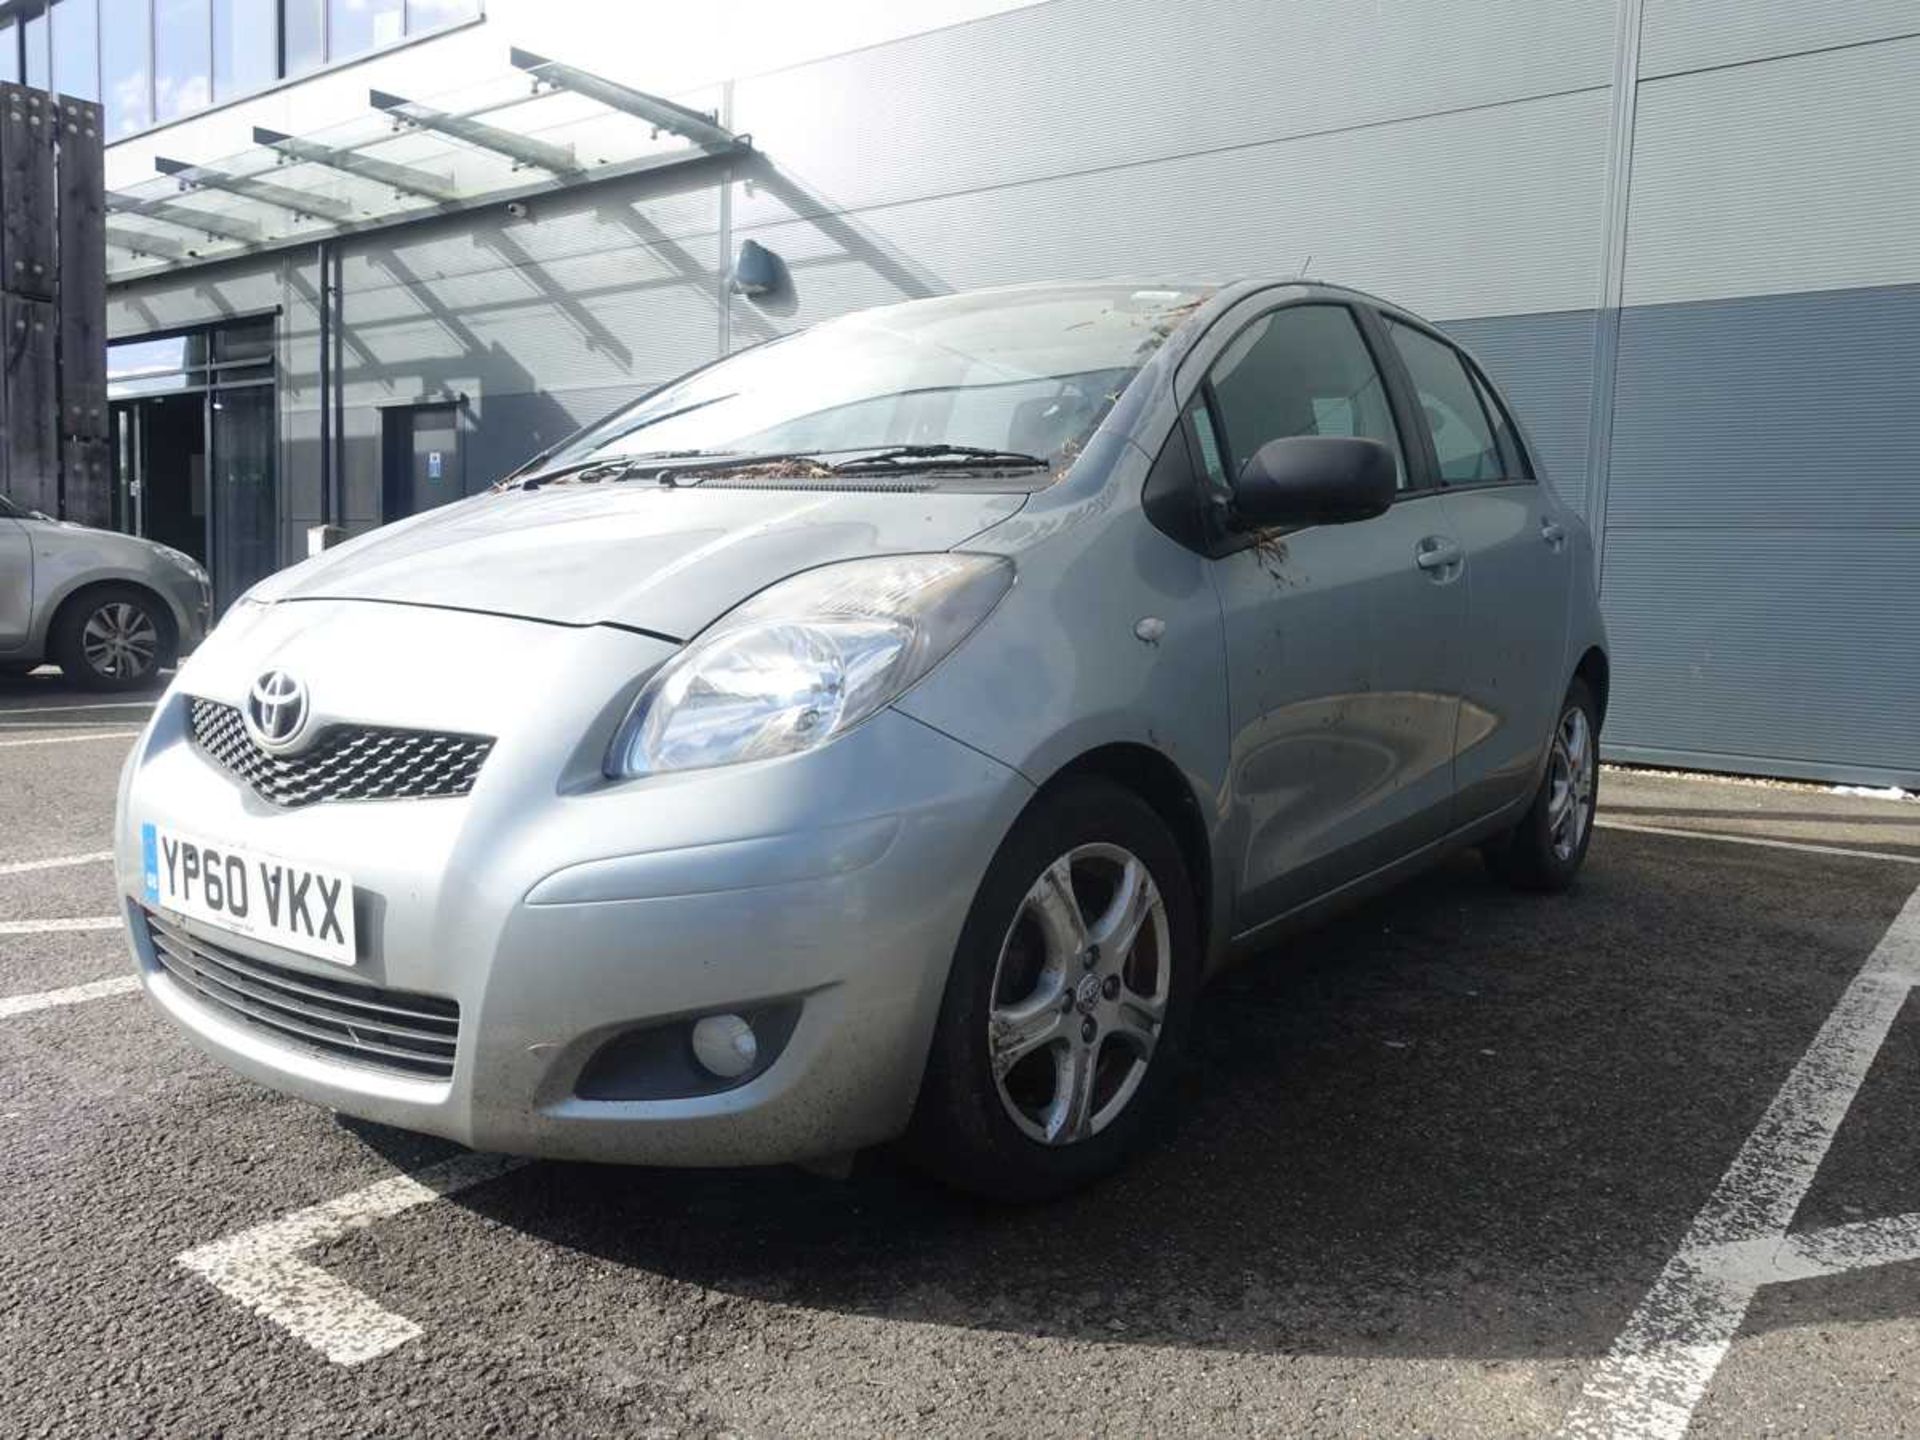 (YP60 VKX) Toyota Yaris TR VVT-1 S-A in silver, first registered 09/02/2011, 6 speed semi auto, 5 - Image 3 of 11